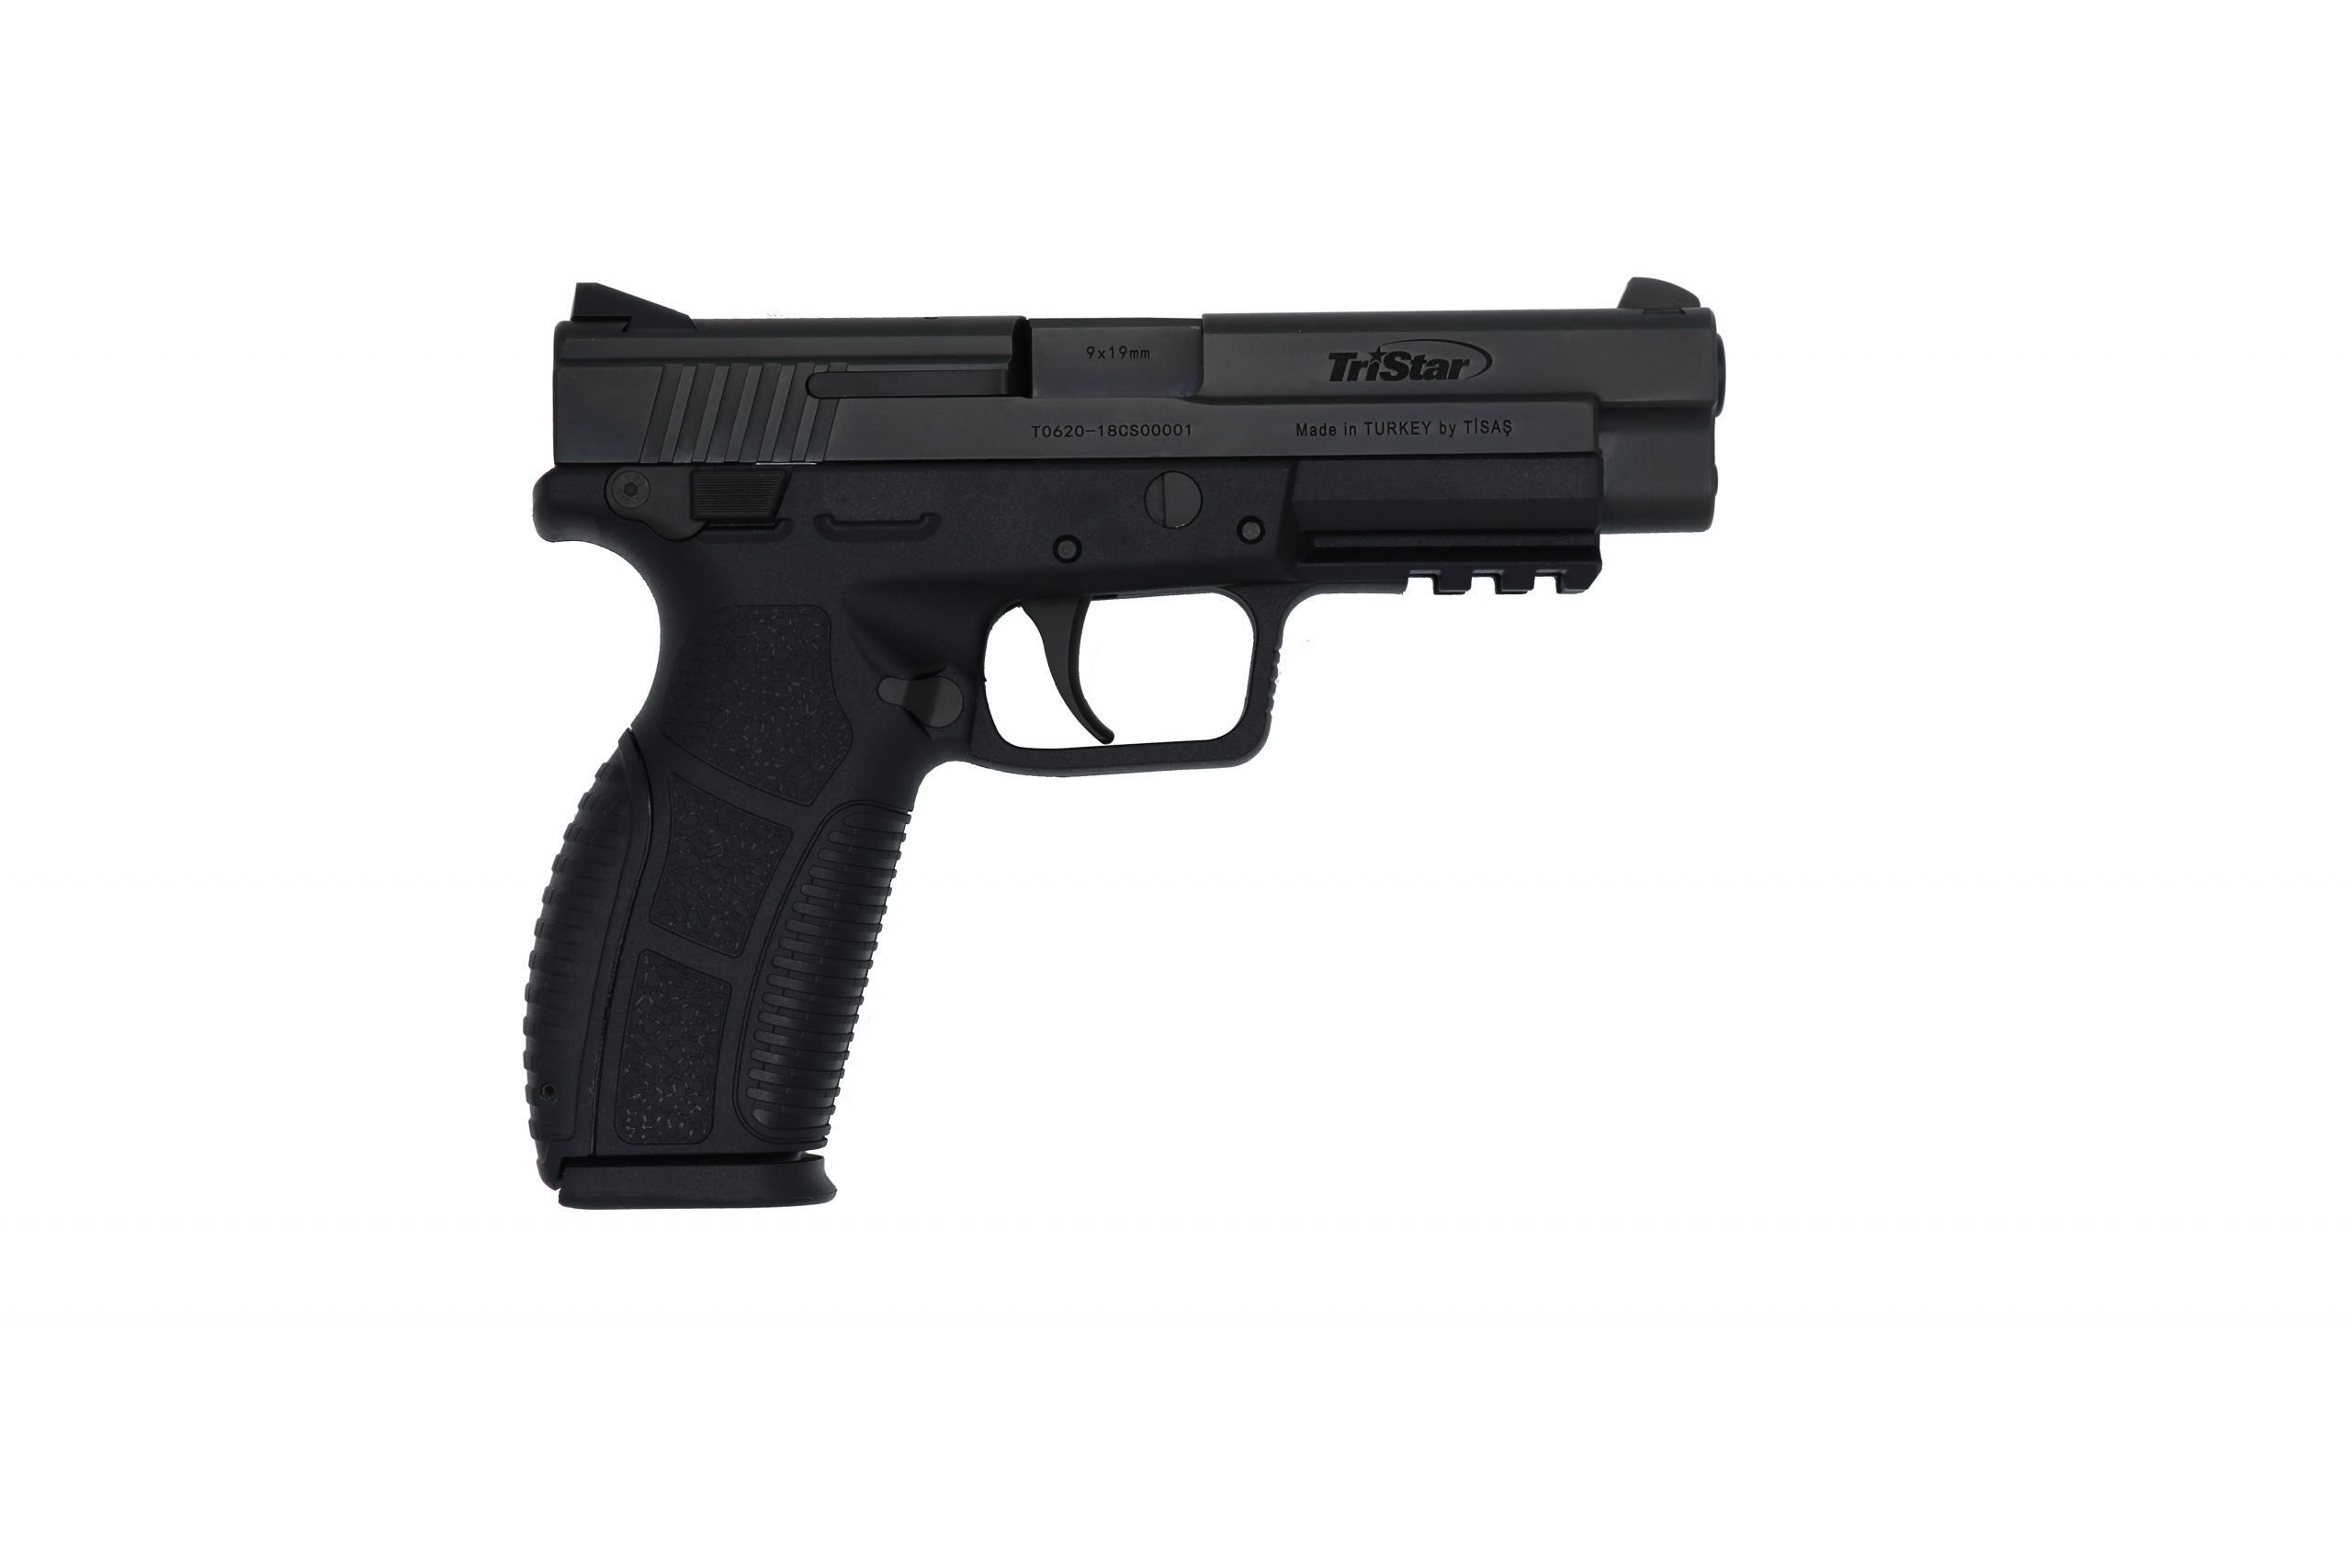 Tristar Sporting Arms Z919 9Mm 4.5″ Black 17+1 Ts85301 Scaled